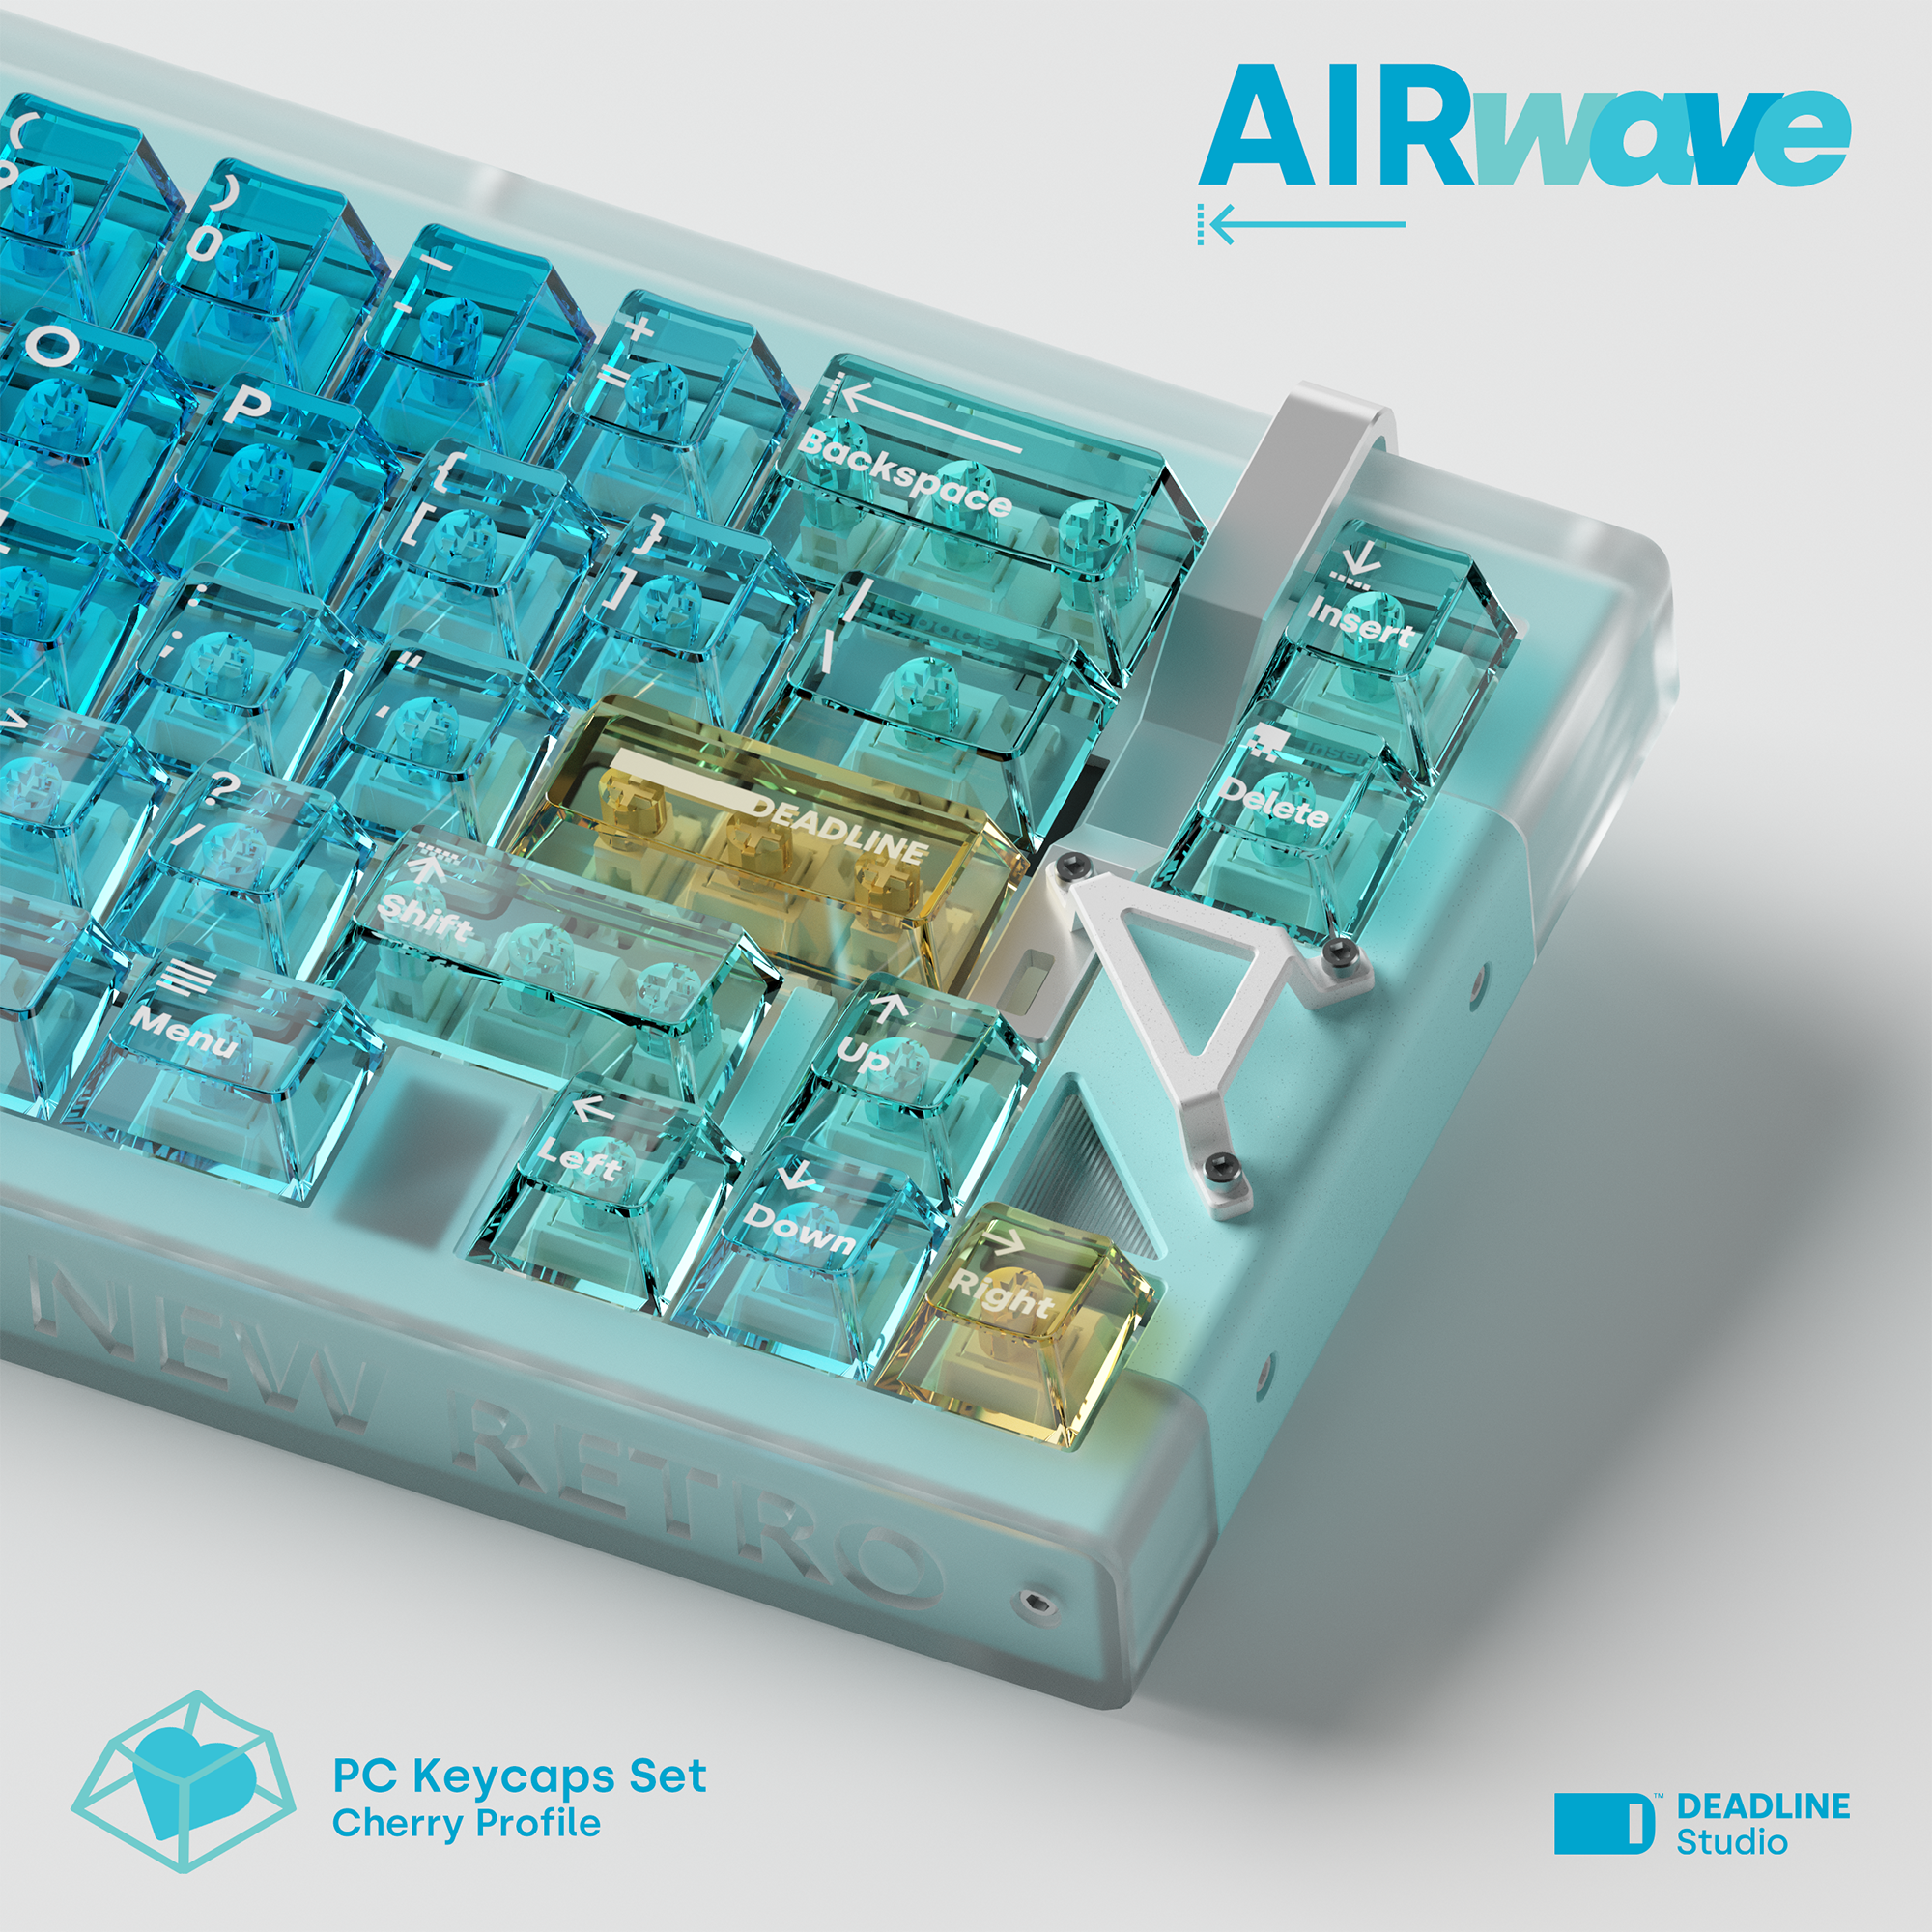 [Coming Soon] AIR Wave Keycaps by Deadline Studio - KeebsForAll